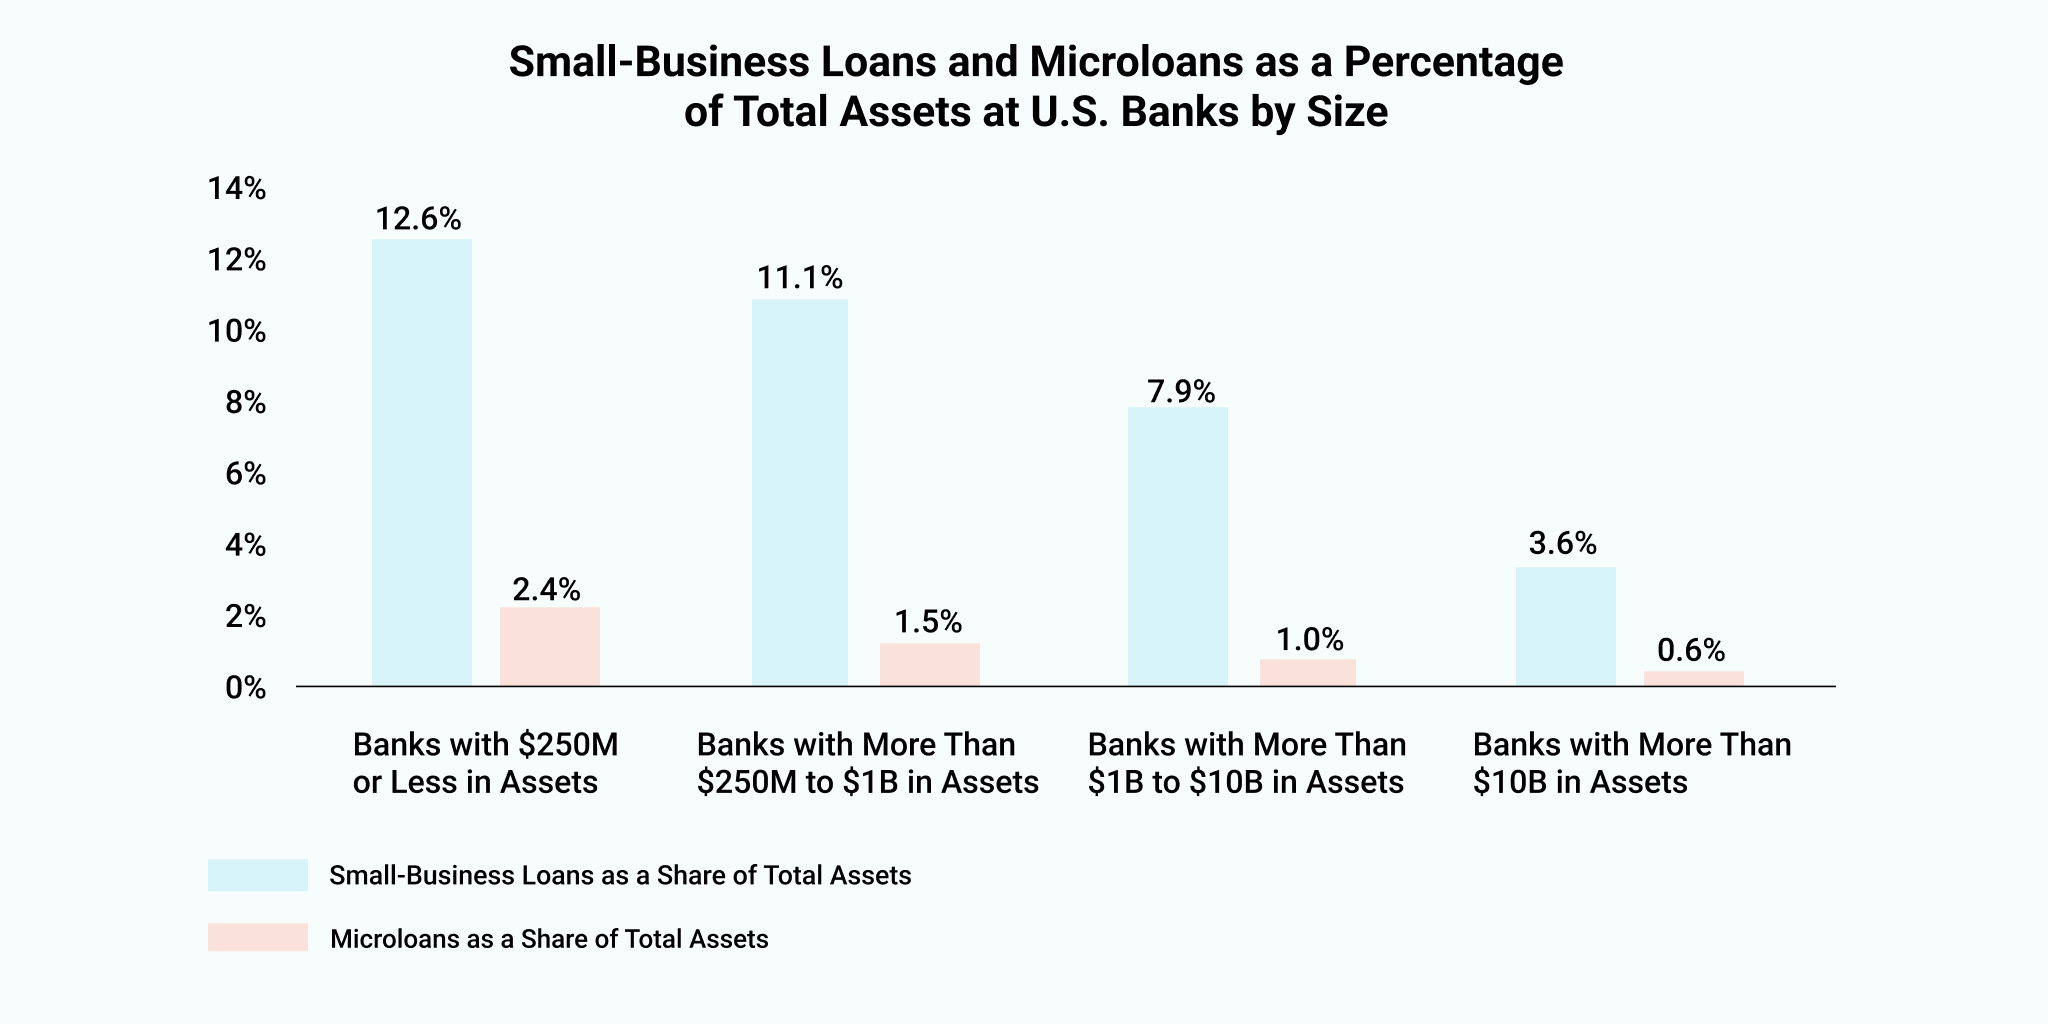 Small business loans and microloans